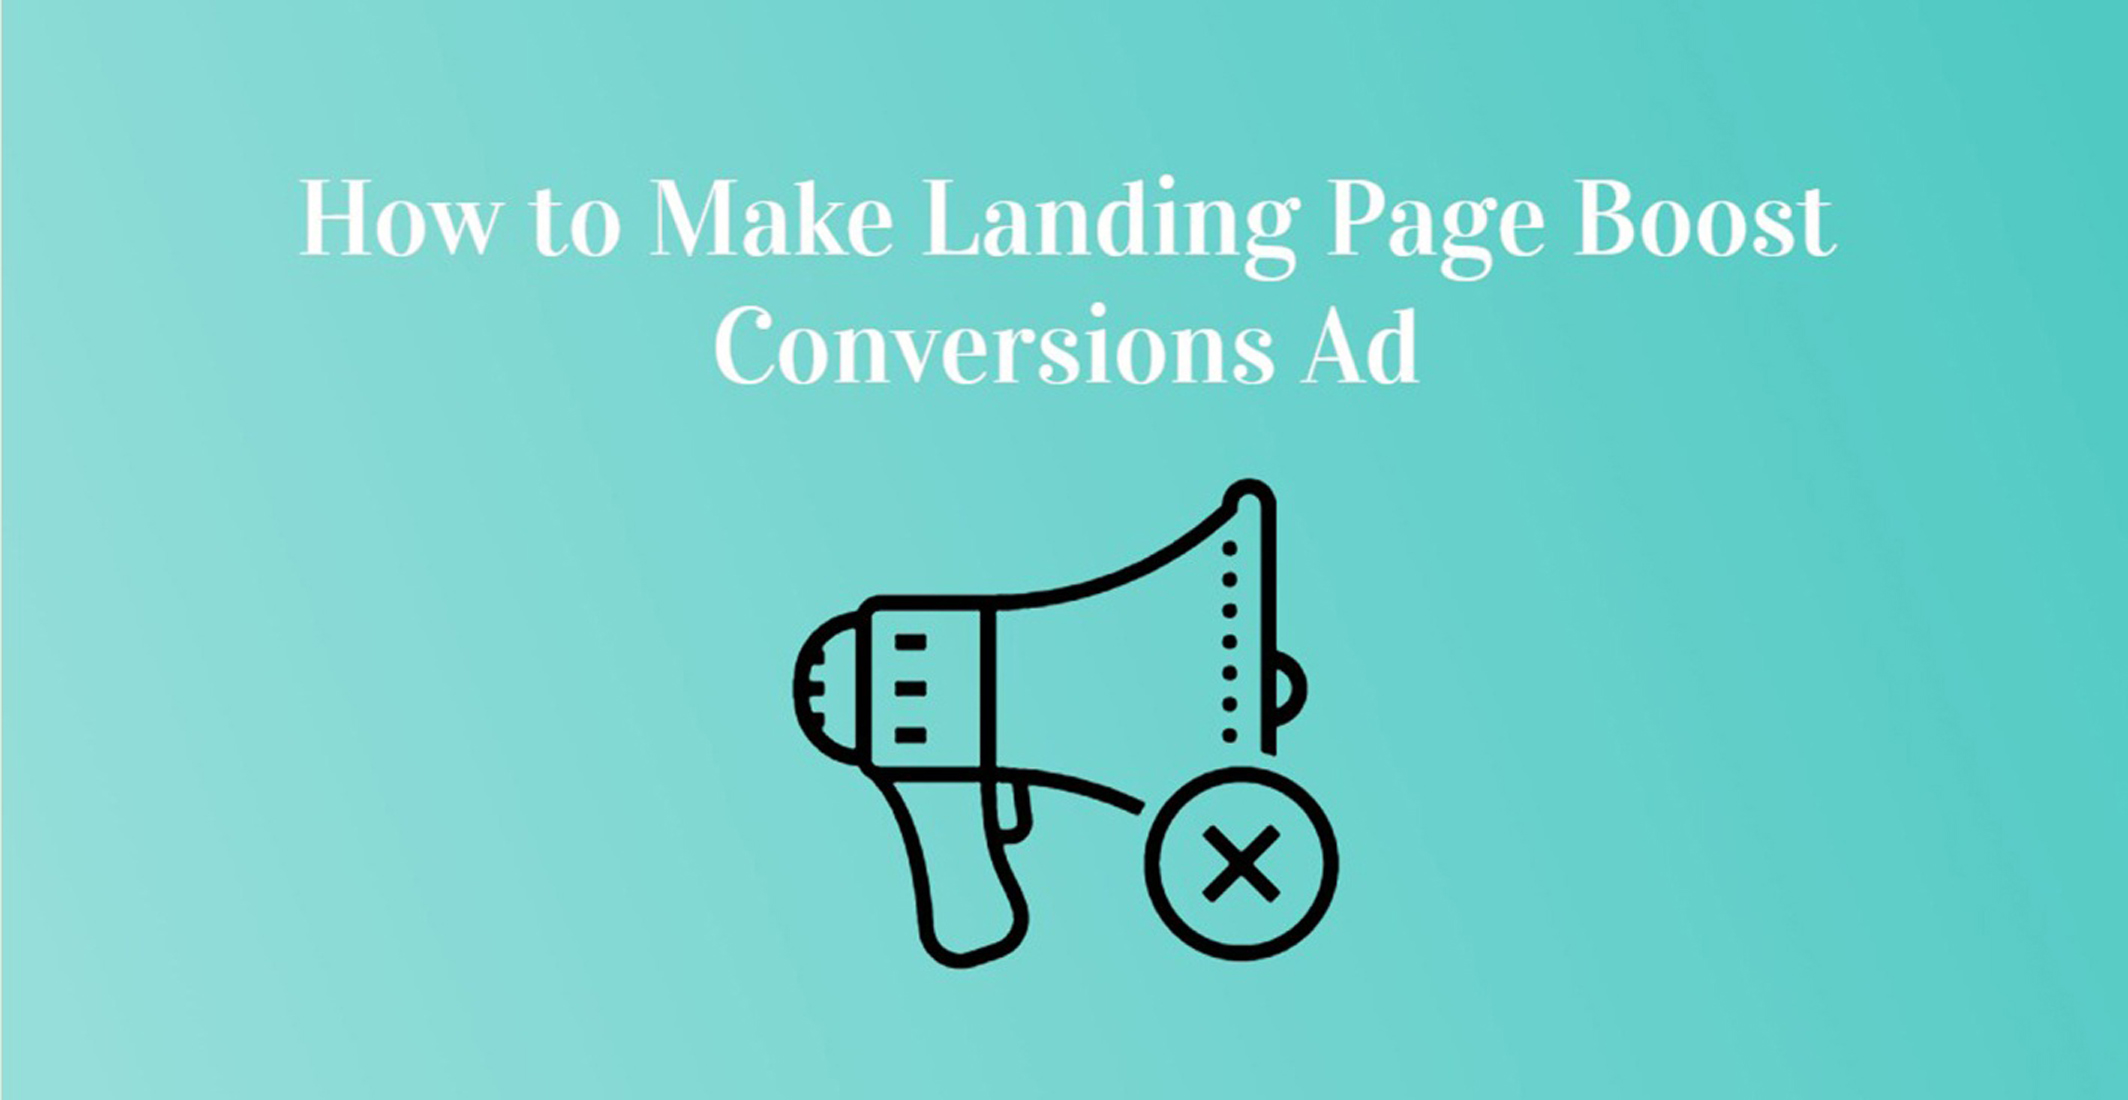 How to Make Landing Page Boost Conversions Ad